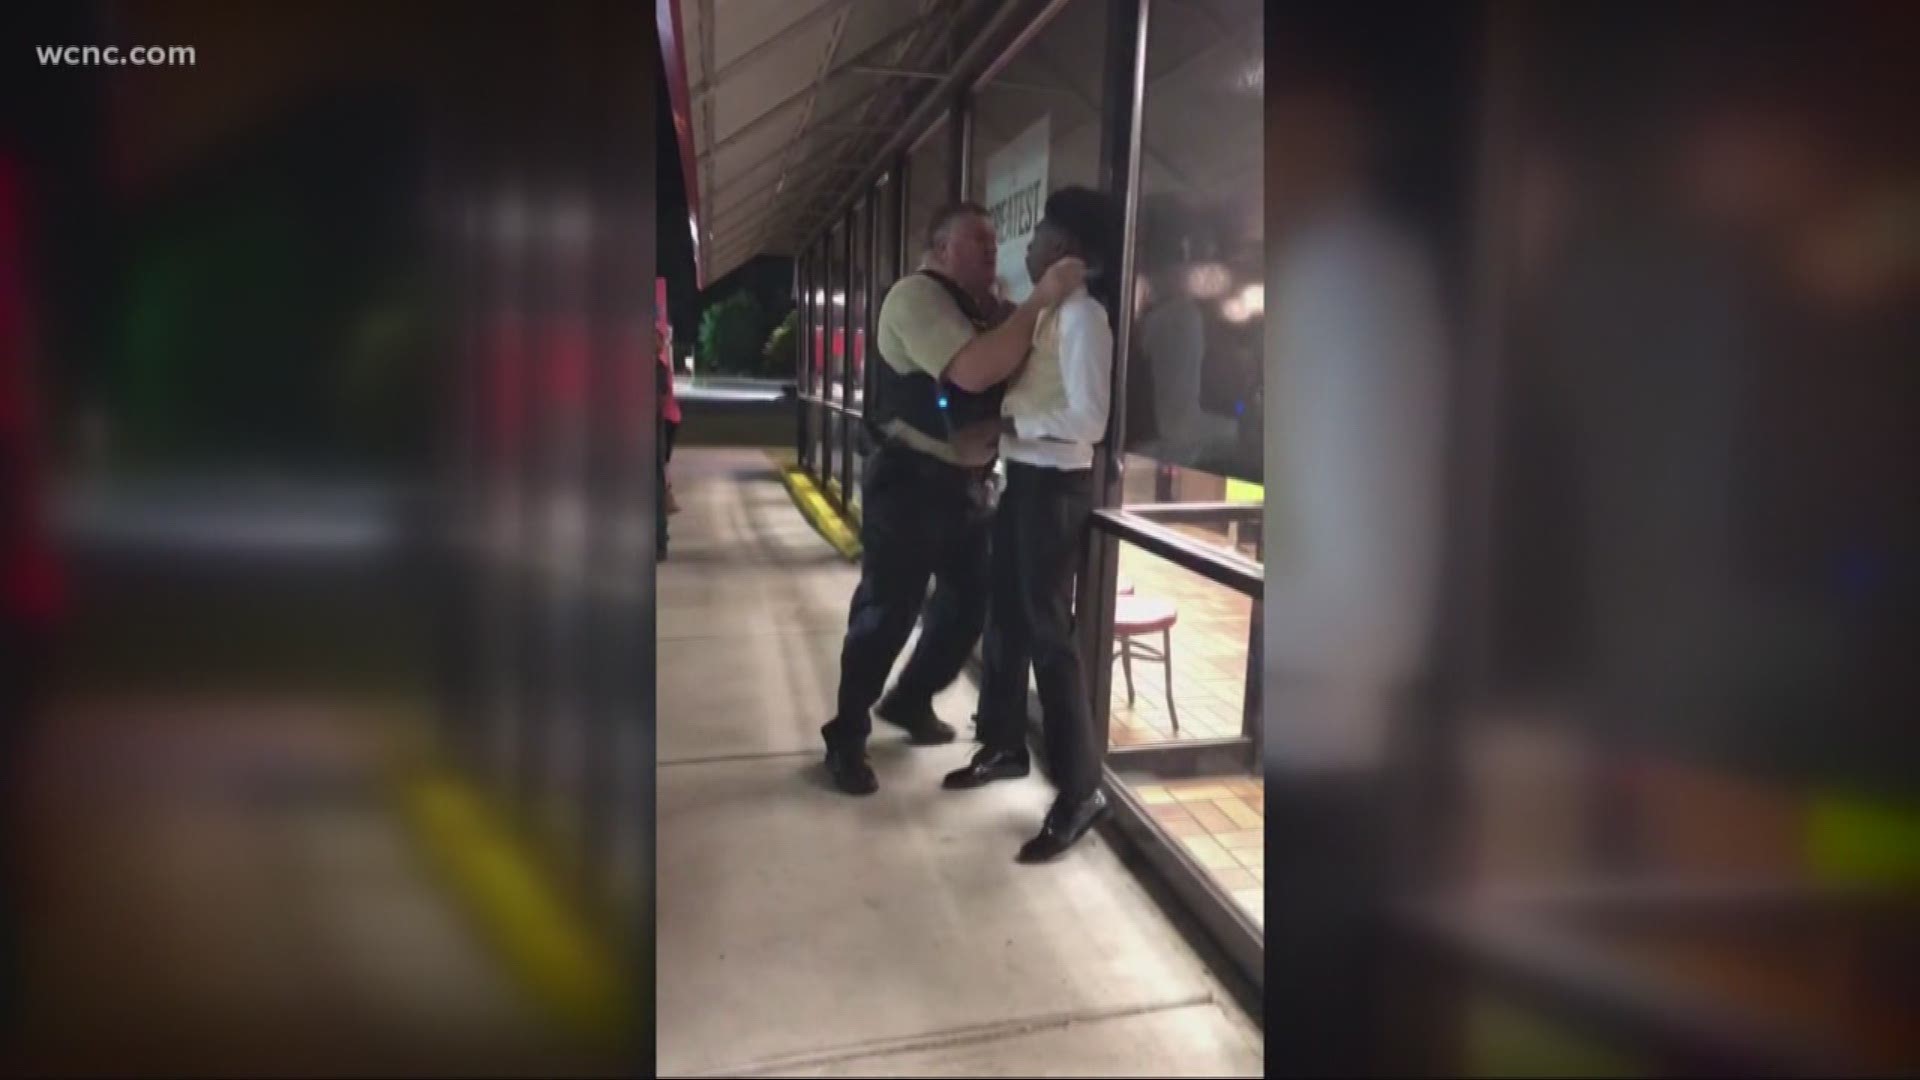 New video shows police officer choking man